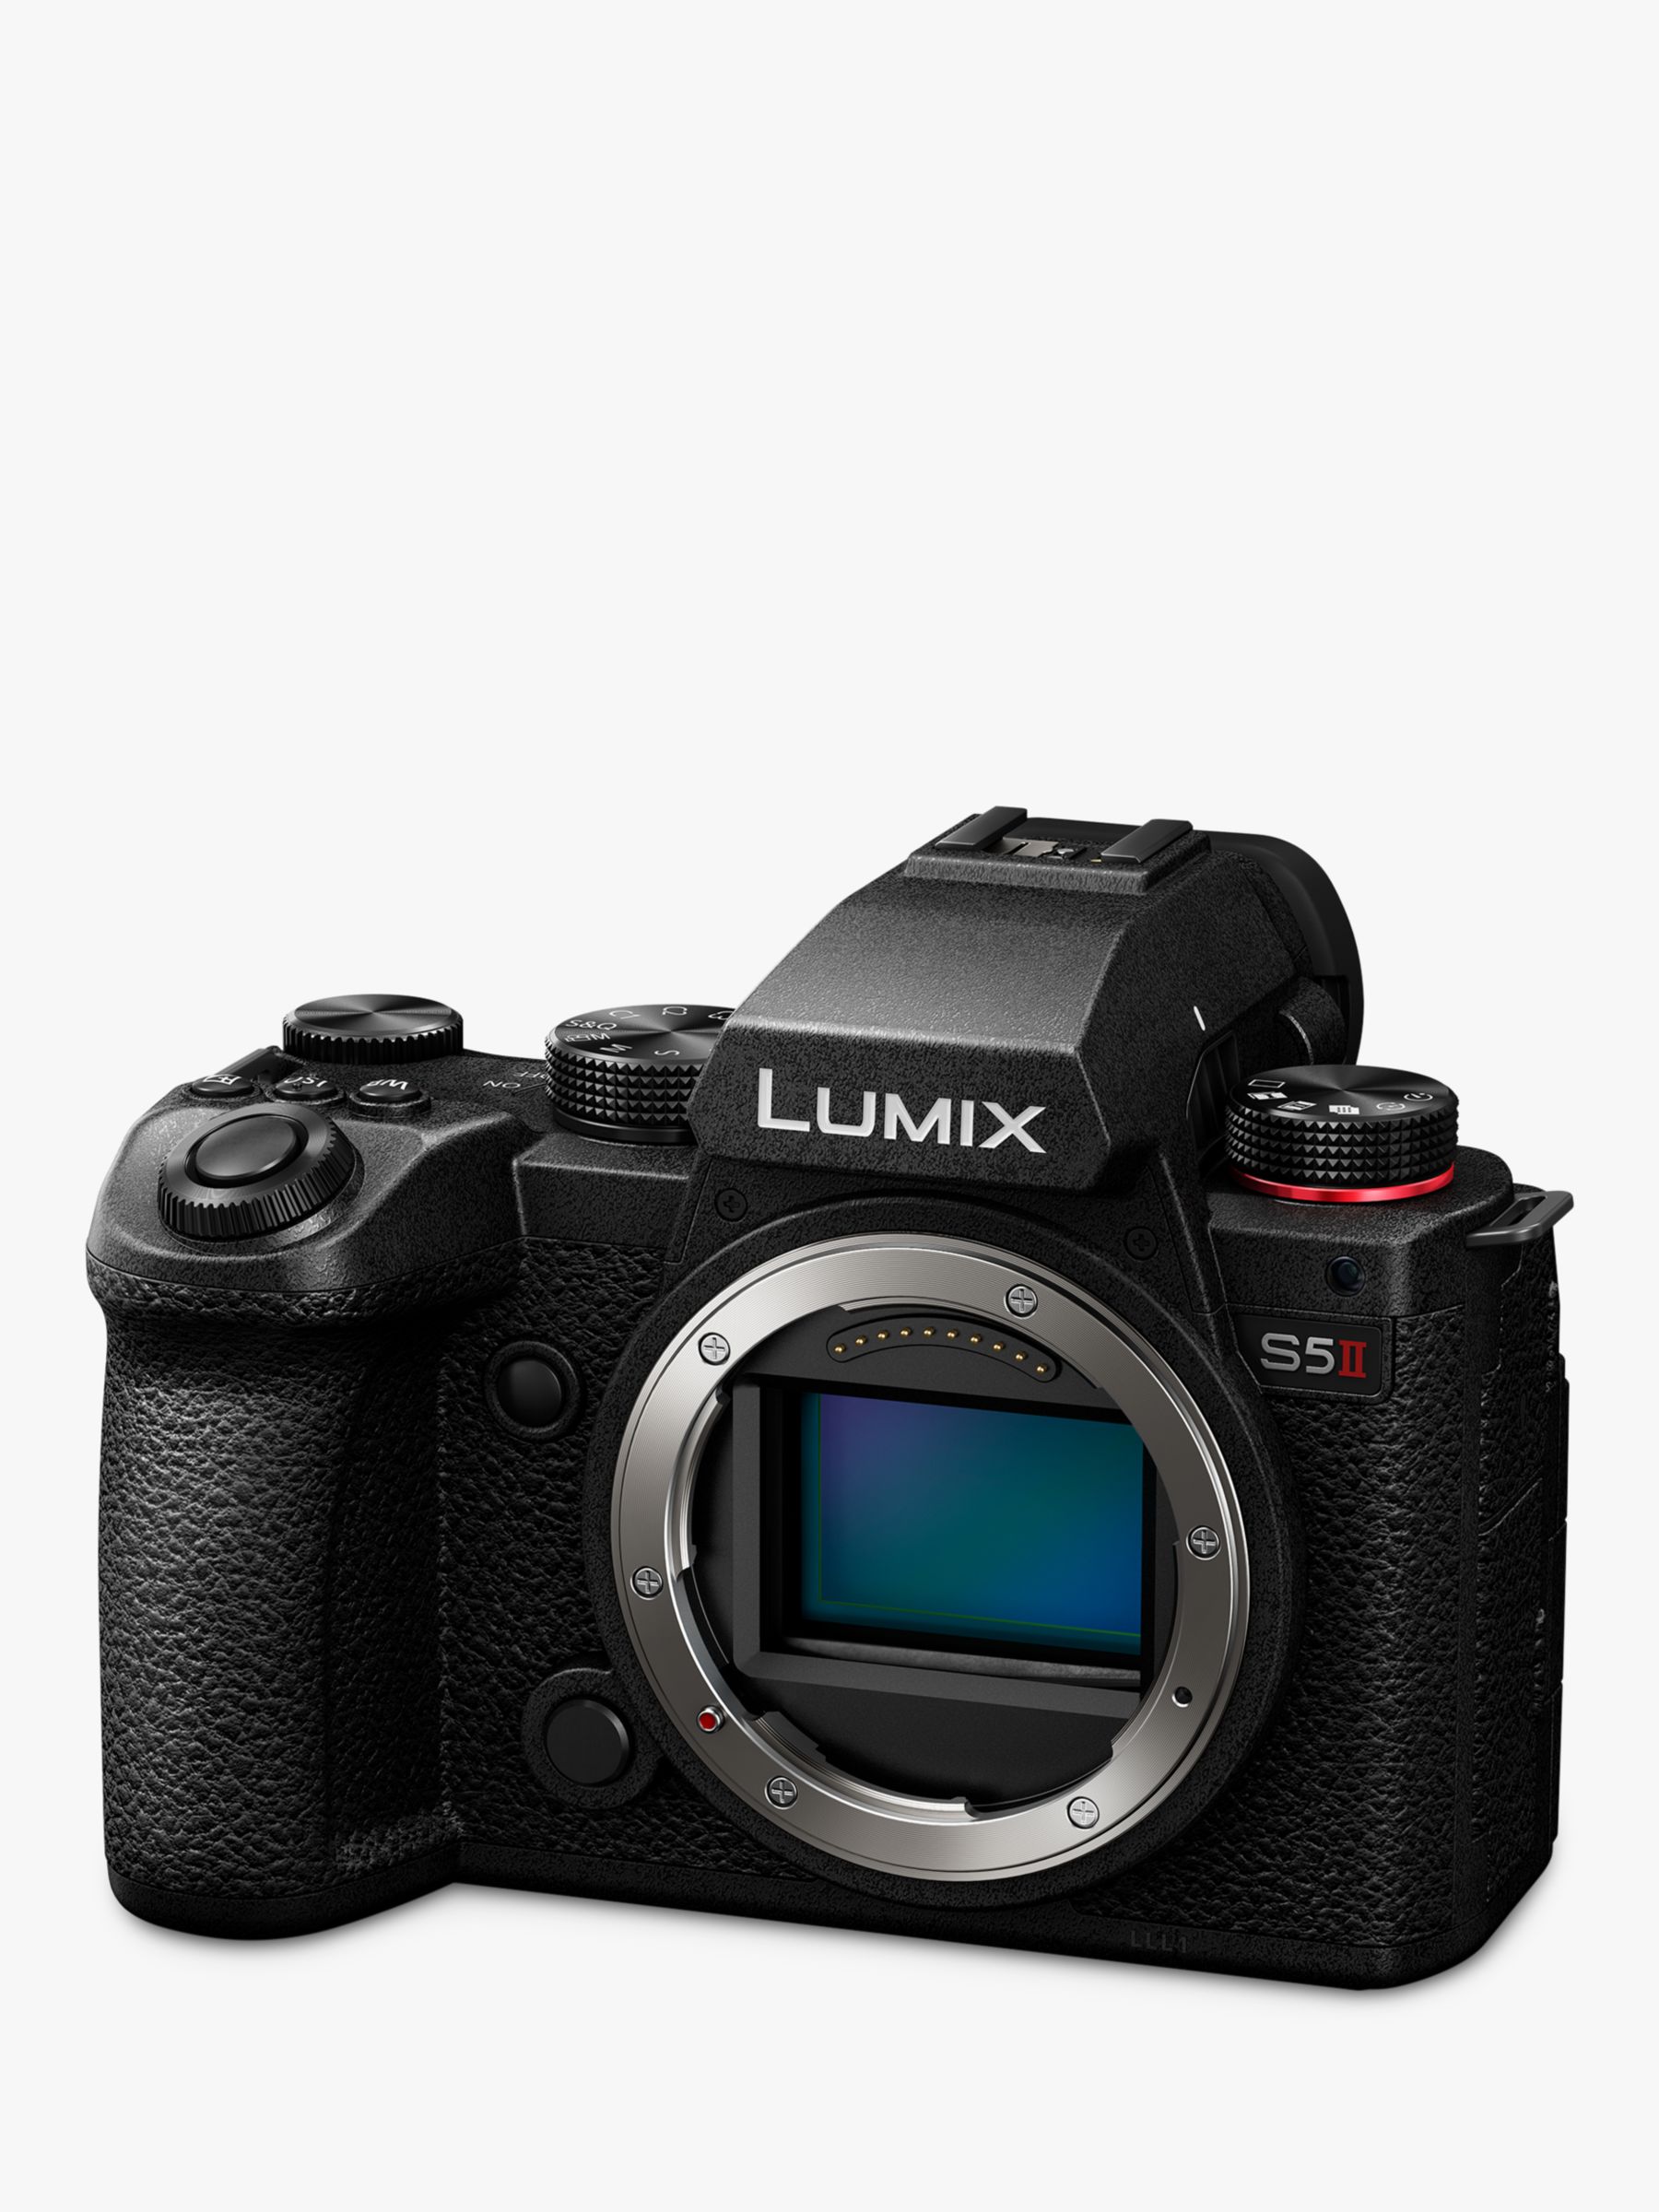 Panasonic Lumix DC-S5 II Compact System Camera, 6K/4K Ultra HD, 24.2MP,  Wi-Fi, Bluetooth, Live Viewfinder, 3” Vari-Angle Touch Screen, Body Only,  Black